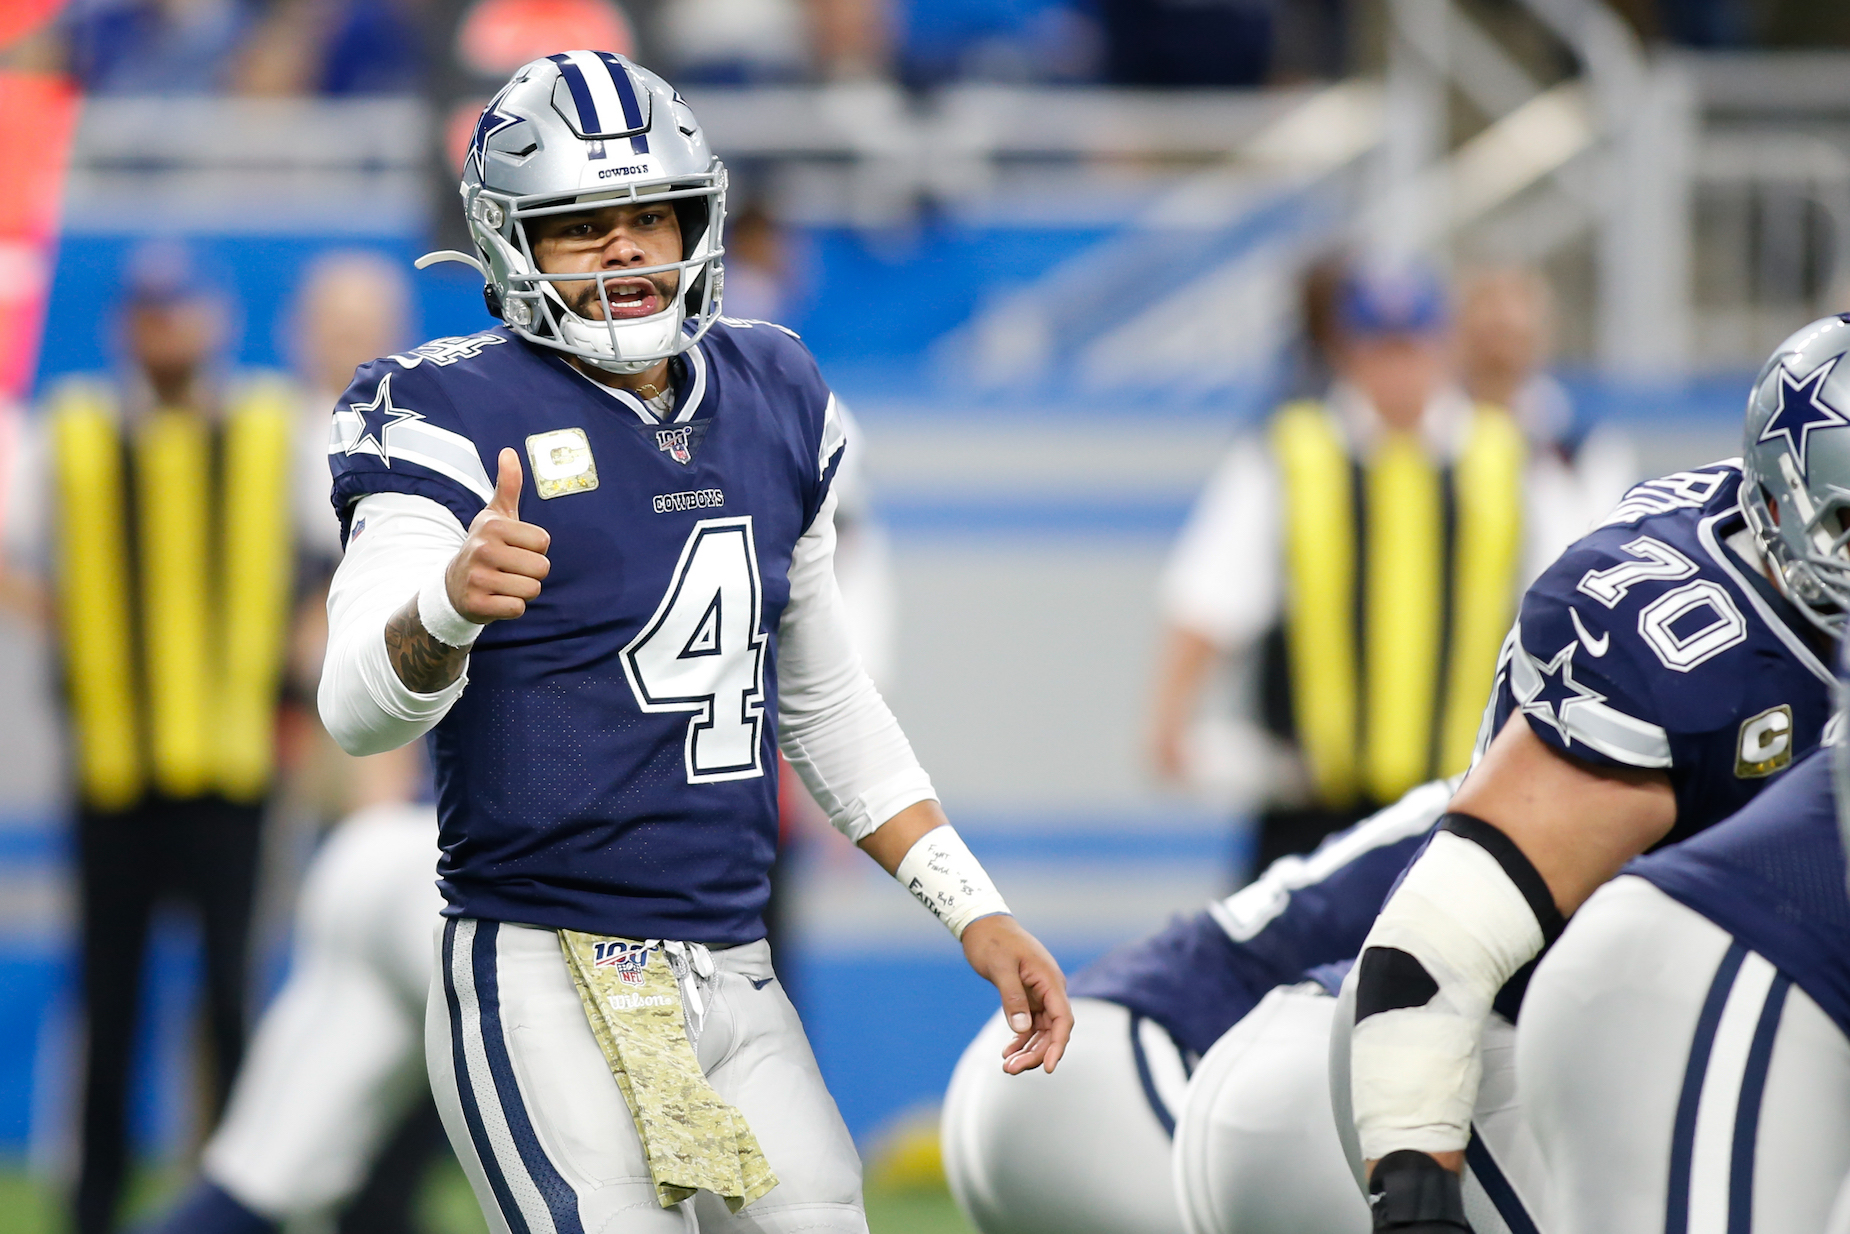 Dak Prescott just told Dallas Cowboys fans exactly what they're hoping to hear ahead of the 2020 NFL season.